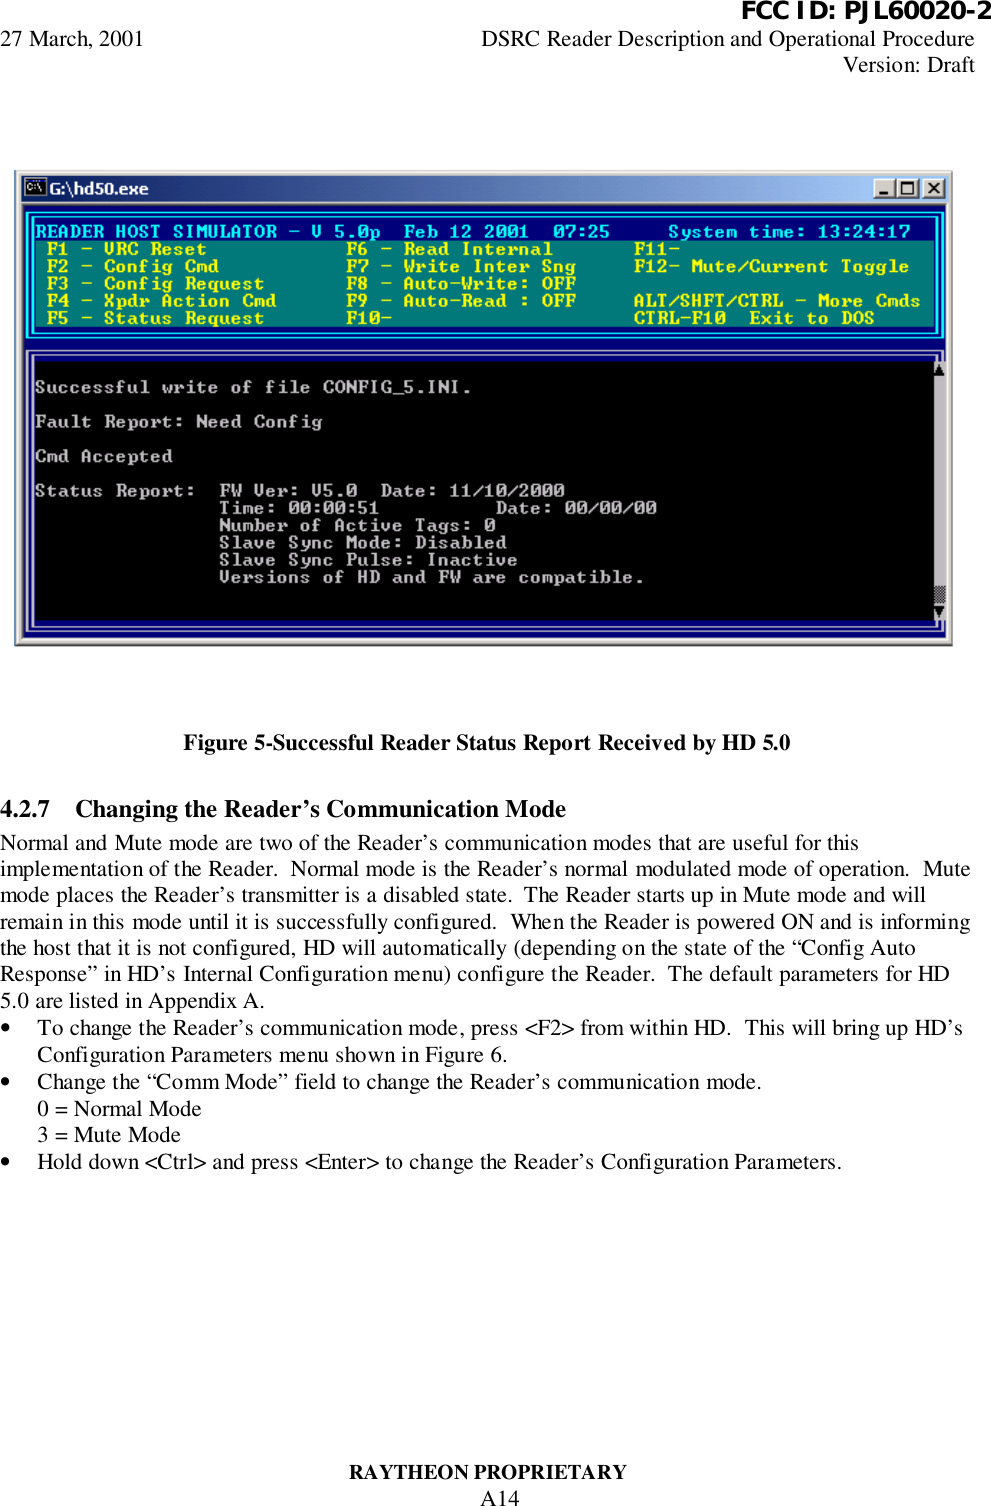          FCC ID: PJL60020-227 March, 2001 DSRC Reader Description and Operational ProcedureVersion: DraftRAYTHEON PROPRIETARYA14Figure 5-Successful Reader Status Report Received by HD 5.04.2.7 Changing the Reader’s Communication ModeNormal and Mute mode are two of the Reader’s communication modes that are useful for thisimplementation of the Reader.  Normal mode is the Reader’s normal modulated mode of operation.  Mutemode places the Reader’s transmitter is a disabled state.  The Reader starts up in Mute mode and willremain in this mode until it is successfully configured.  When the Reader is powered ON and is informingthe host that it is not configured, HD will automatically (depending on the state of the “Config AutoResponse” in HD’s Internal Configuration menu) configure the Reader.  The default parameters for HD5.0 are listed in Appendix A.• To change the Reader’s communication mode, press &lt;F2&gt; from within HD.  This will bring up HD’sConfiguration Parameters menu shown in Figure 6.• Change the “Comm Mode” field to change the Reader’s communication mode.0 = Normal Mode3 = Mute Mode• Hold down &lt;Ctrl&gt; and press &lt;Enter&gt; to change the Reader’s Configuration Parameters.